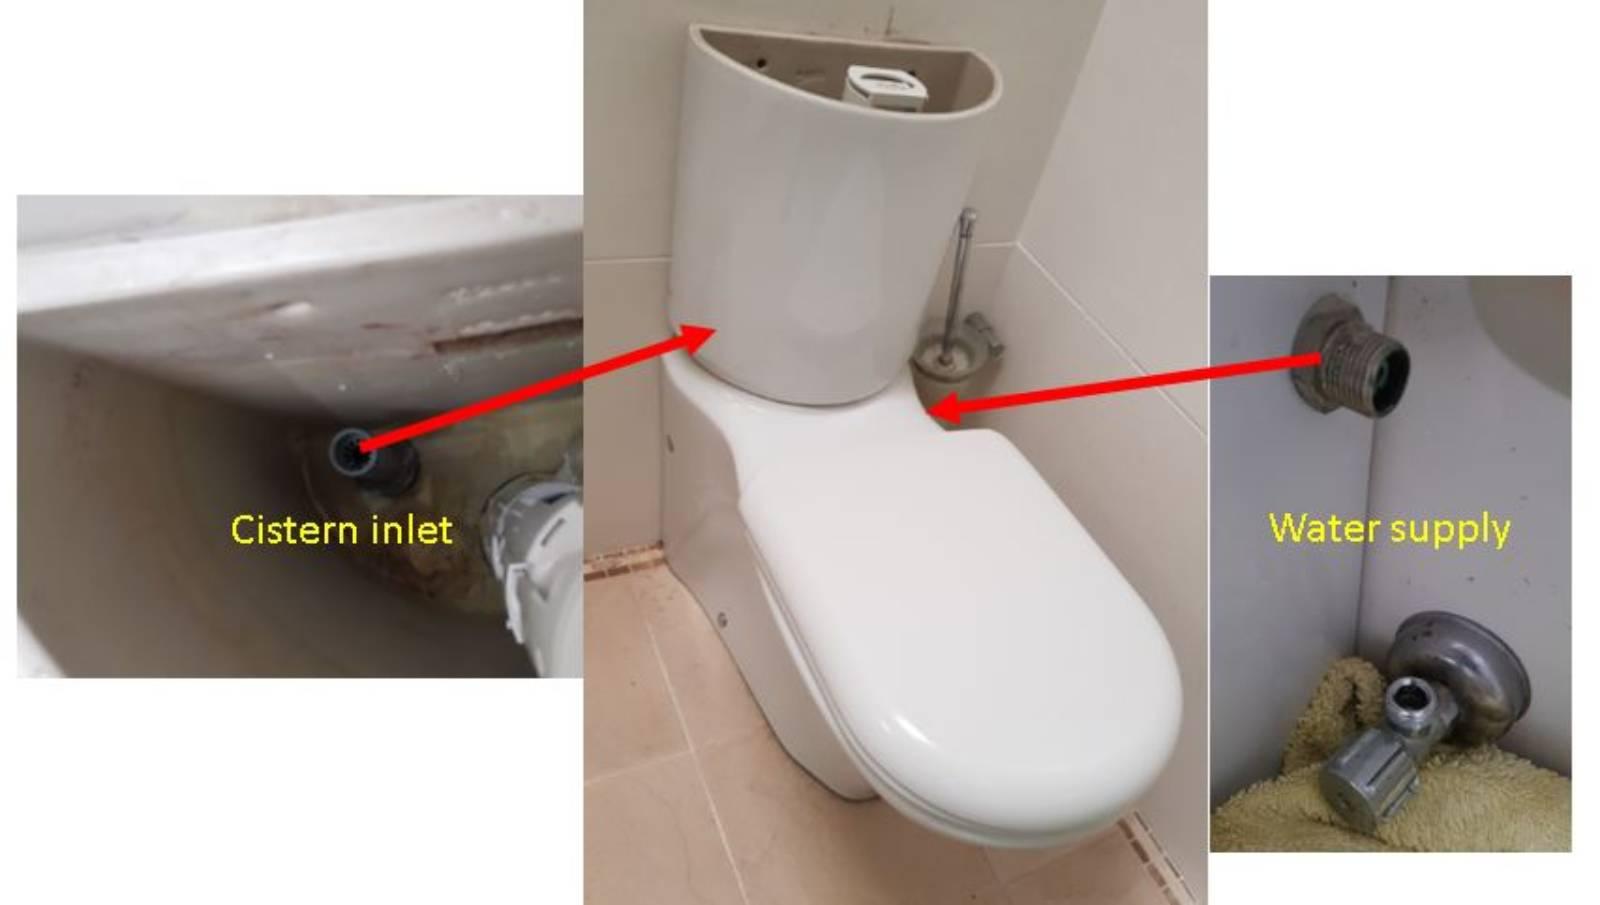 Toilet cistern not filling with water